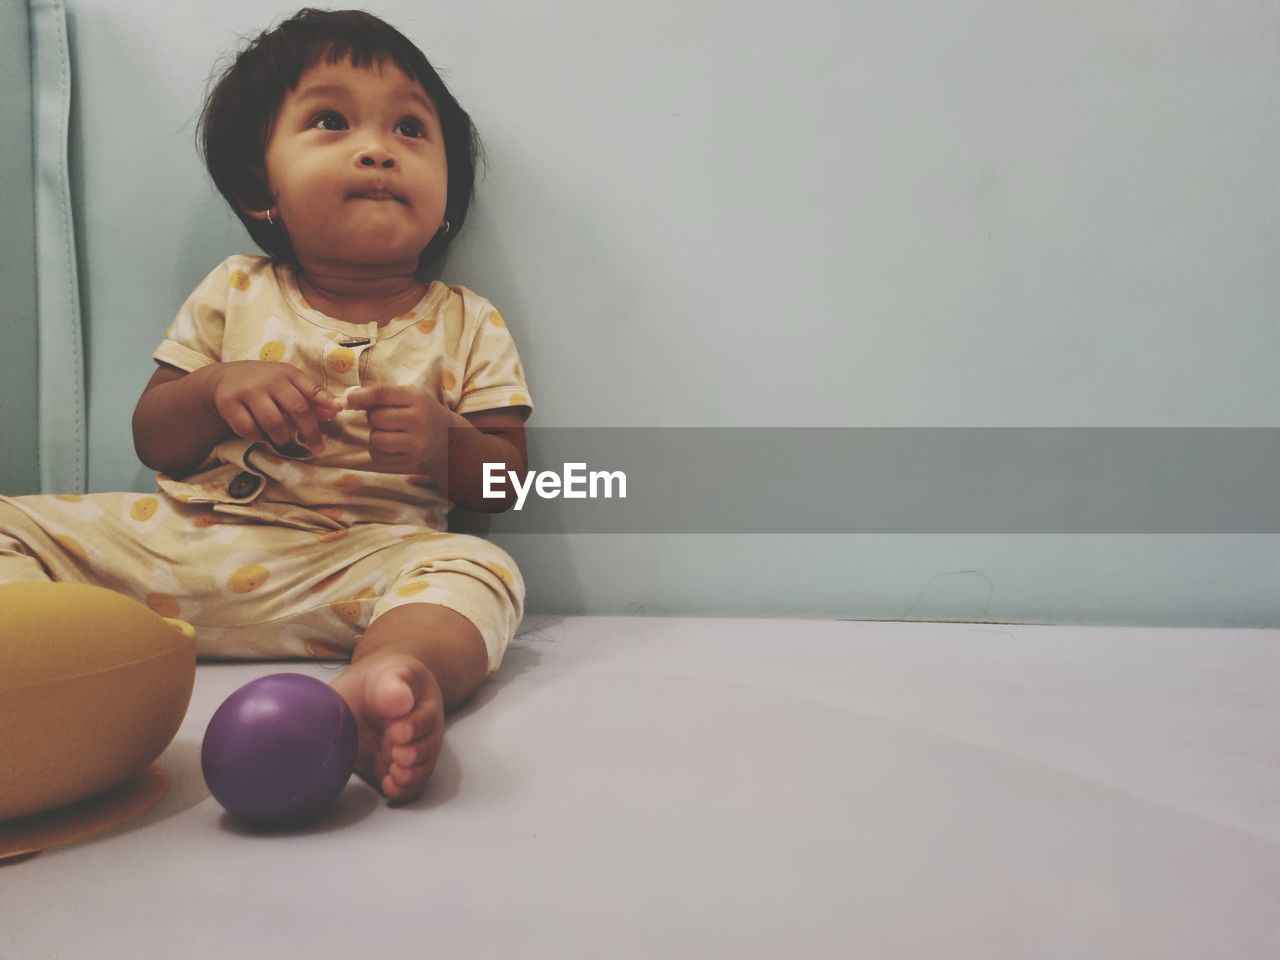 child, childhood, one person, baby, indoors, person, sitting, innocence, full length, cute, skin, copy space, portrait, front view, looking, baby clothing, babyhood, toddler, clothing, lifestyles, human face, emotion, looking away, casual clothing, domestic room